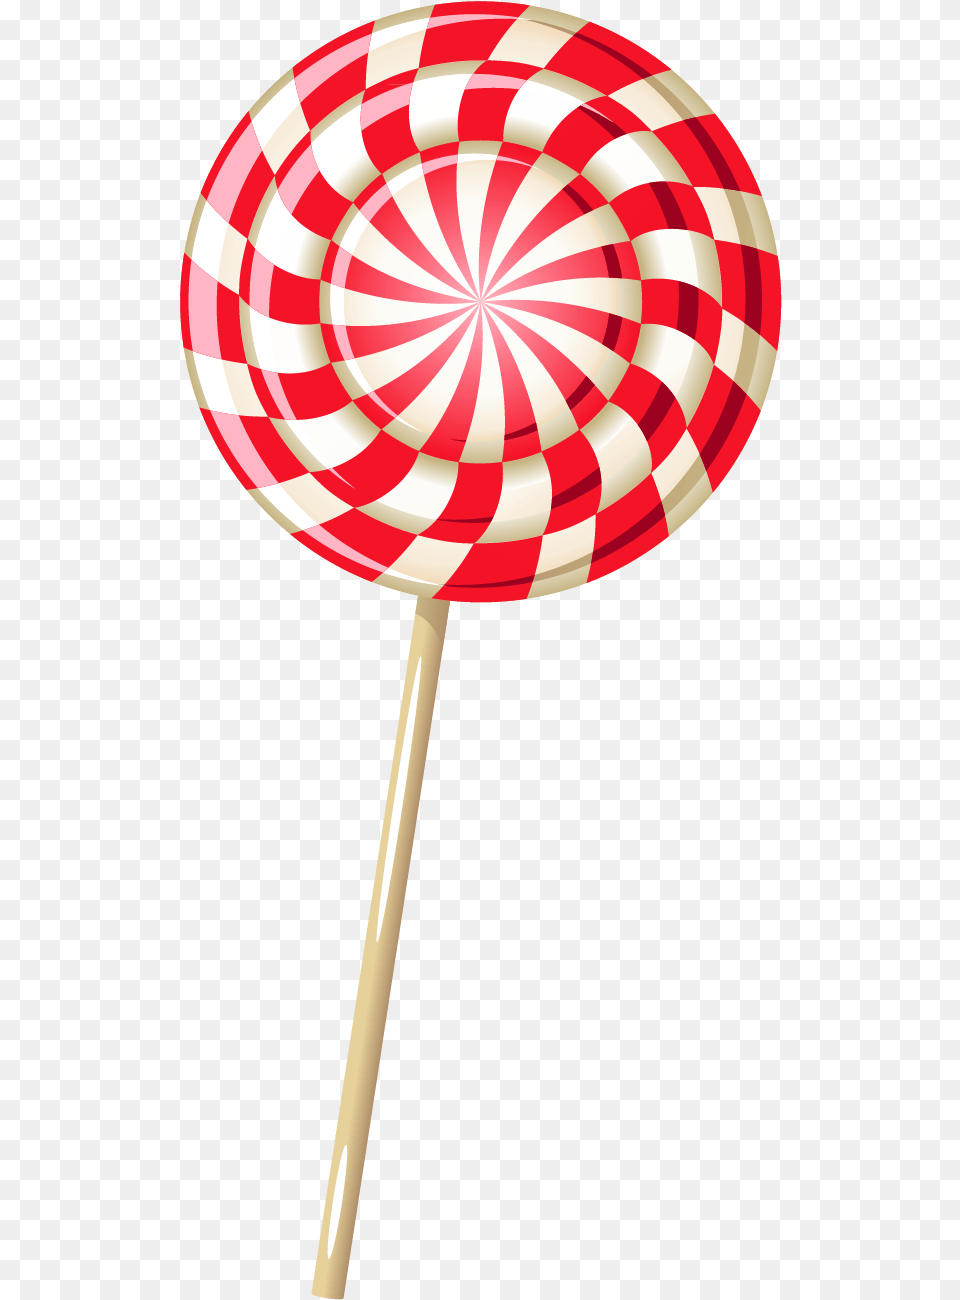 Lollipop Single Large Background Lollipop, Candy, Food, Sweets Free Png Download